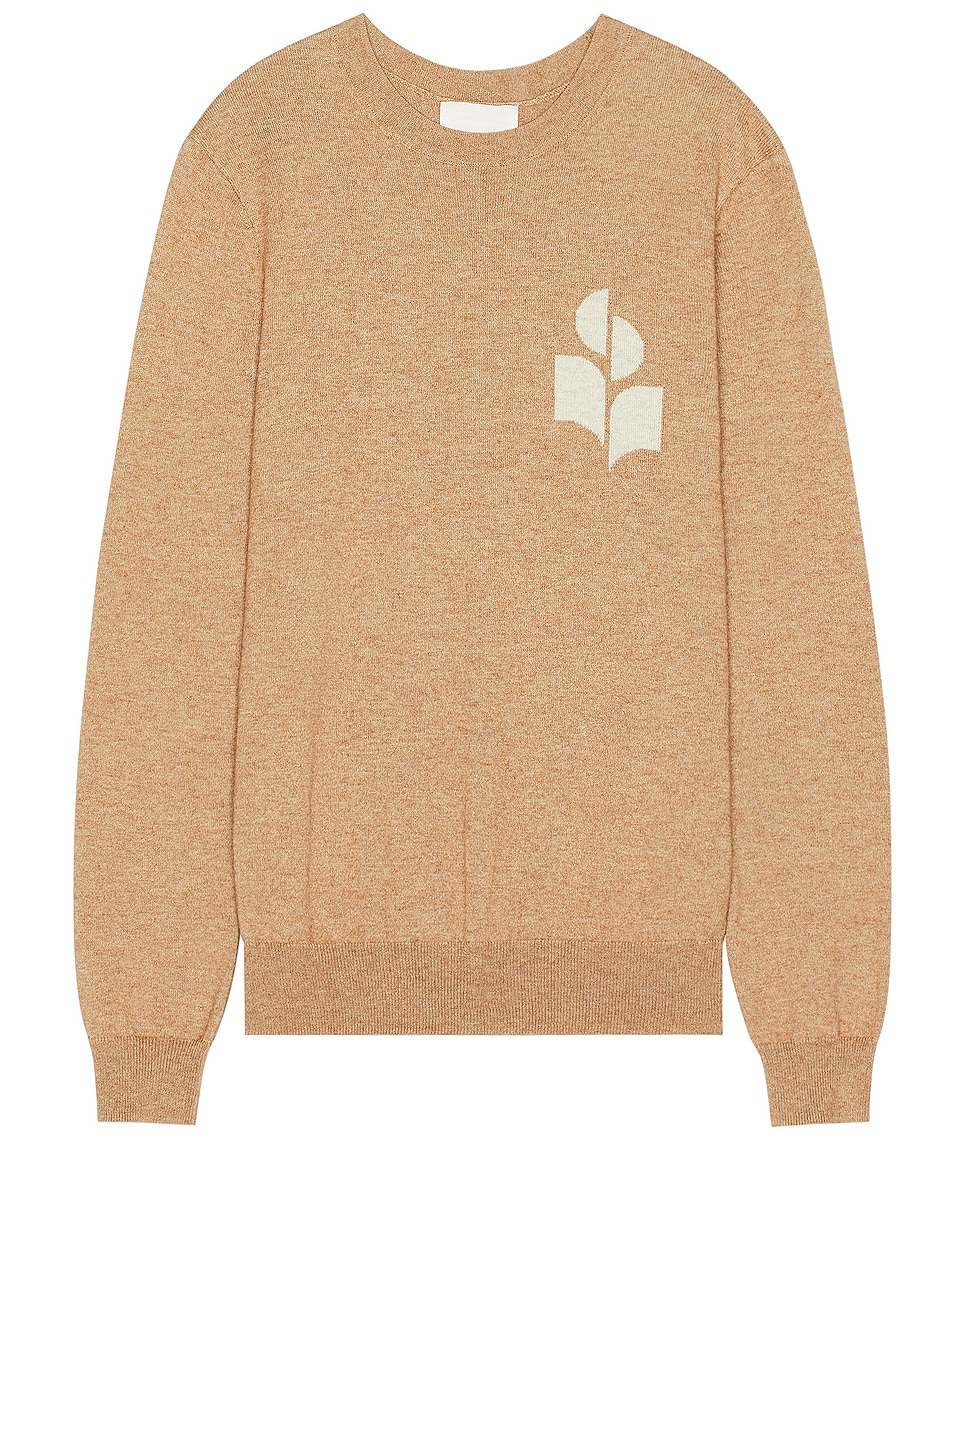 Image 1 of Isabel Marant Evans Iconic Sweater in Camel